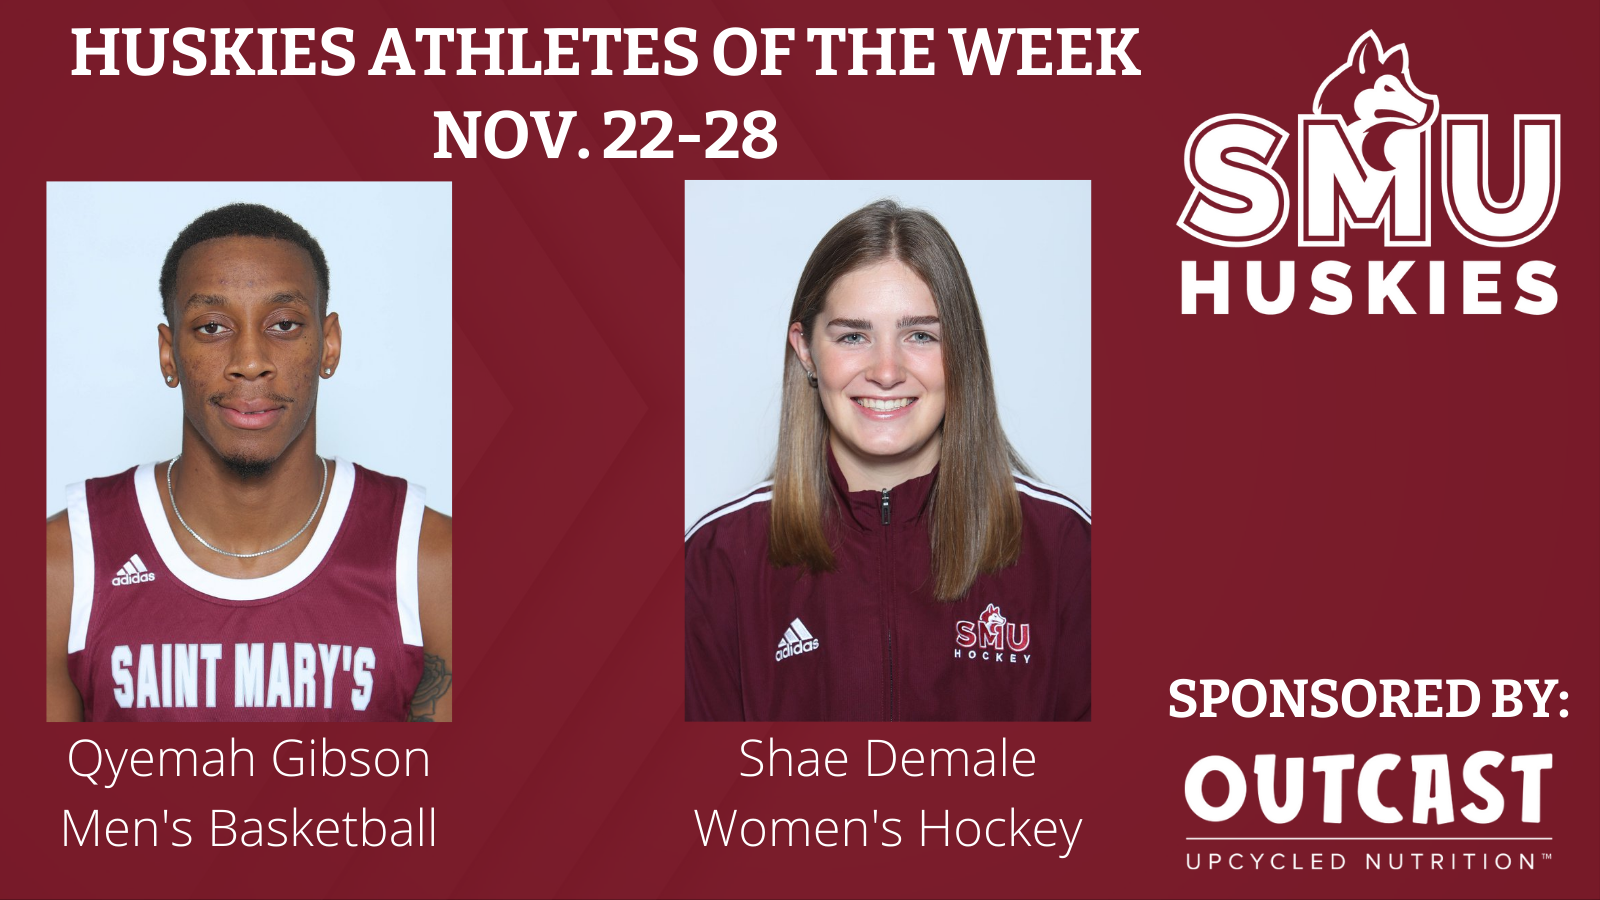 Men’s basketball player Qyemah Gibson and women’s hockey player Shae Demale have been named Huskies Athlete of the Week, sponsored by Outcast Upcycled Nutrition.